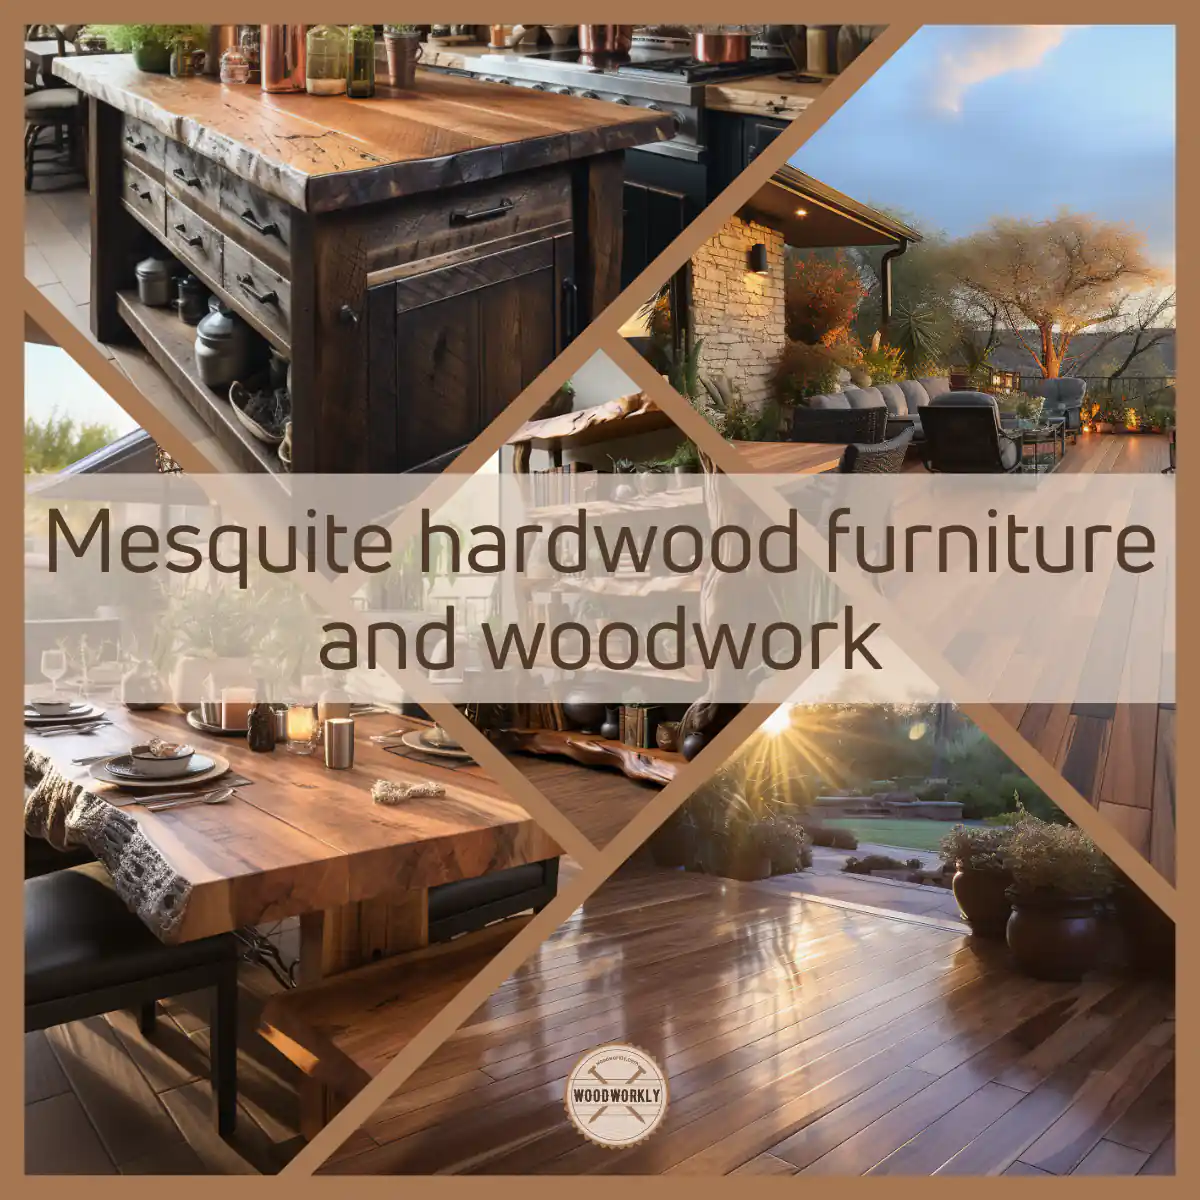 Mesquite hardwood furniture and woodwork